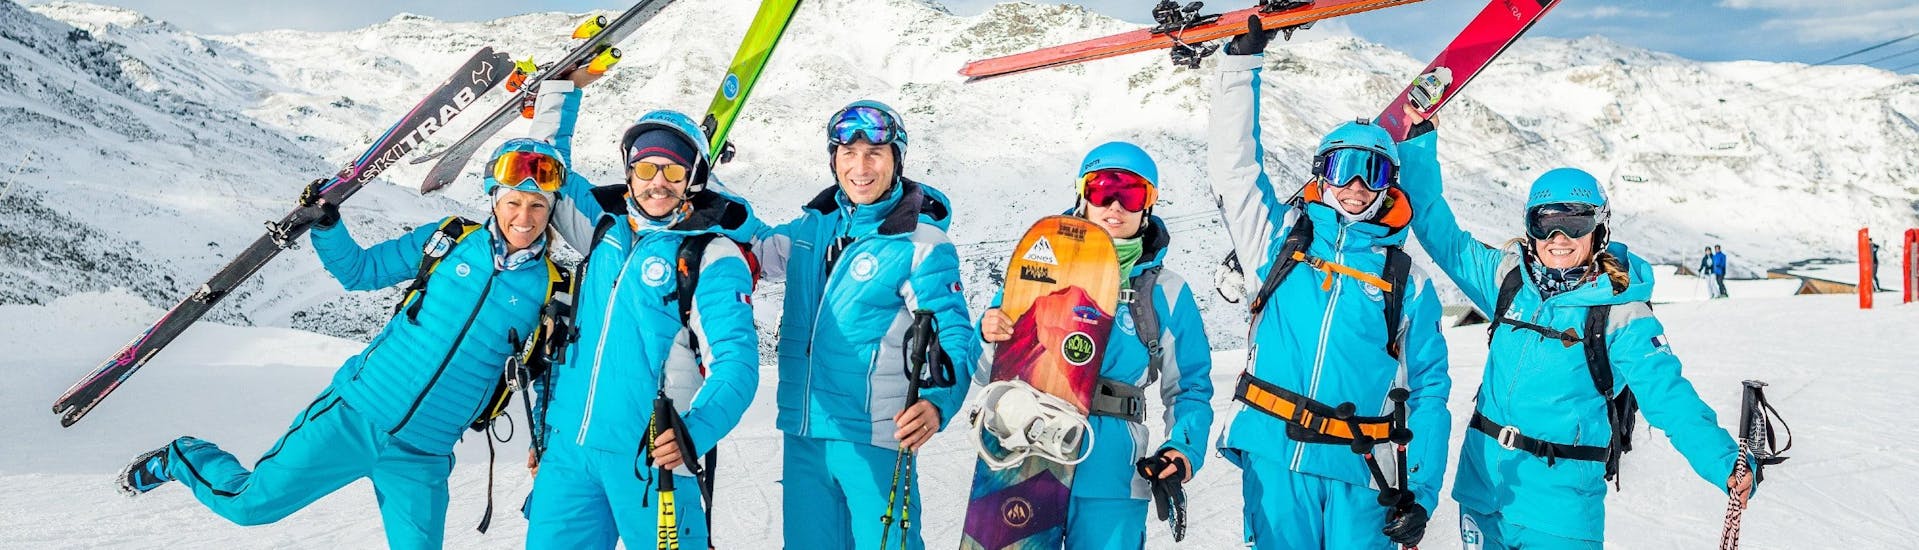 The ski and snowboard instructors of ESI Alpe d'Huez - European Ski School are looking forward to welcoming participants to the ski and snowboarding lessons.